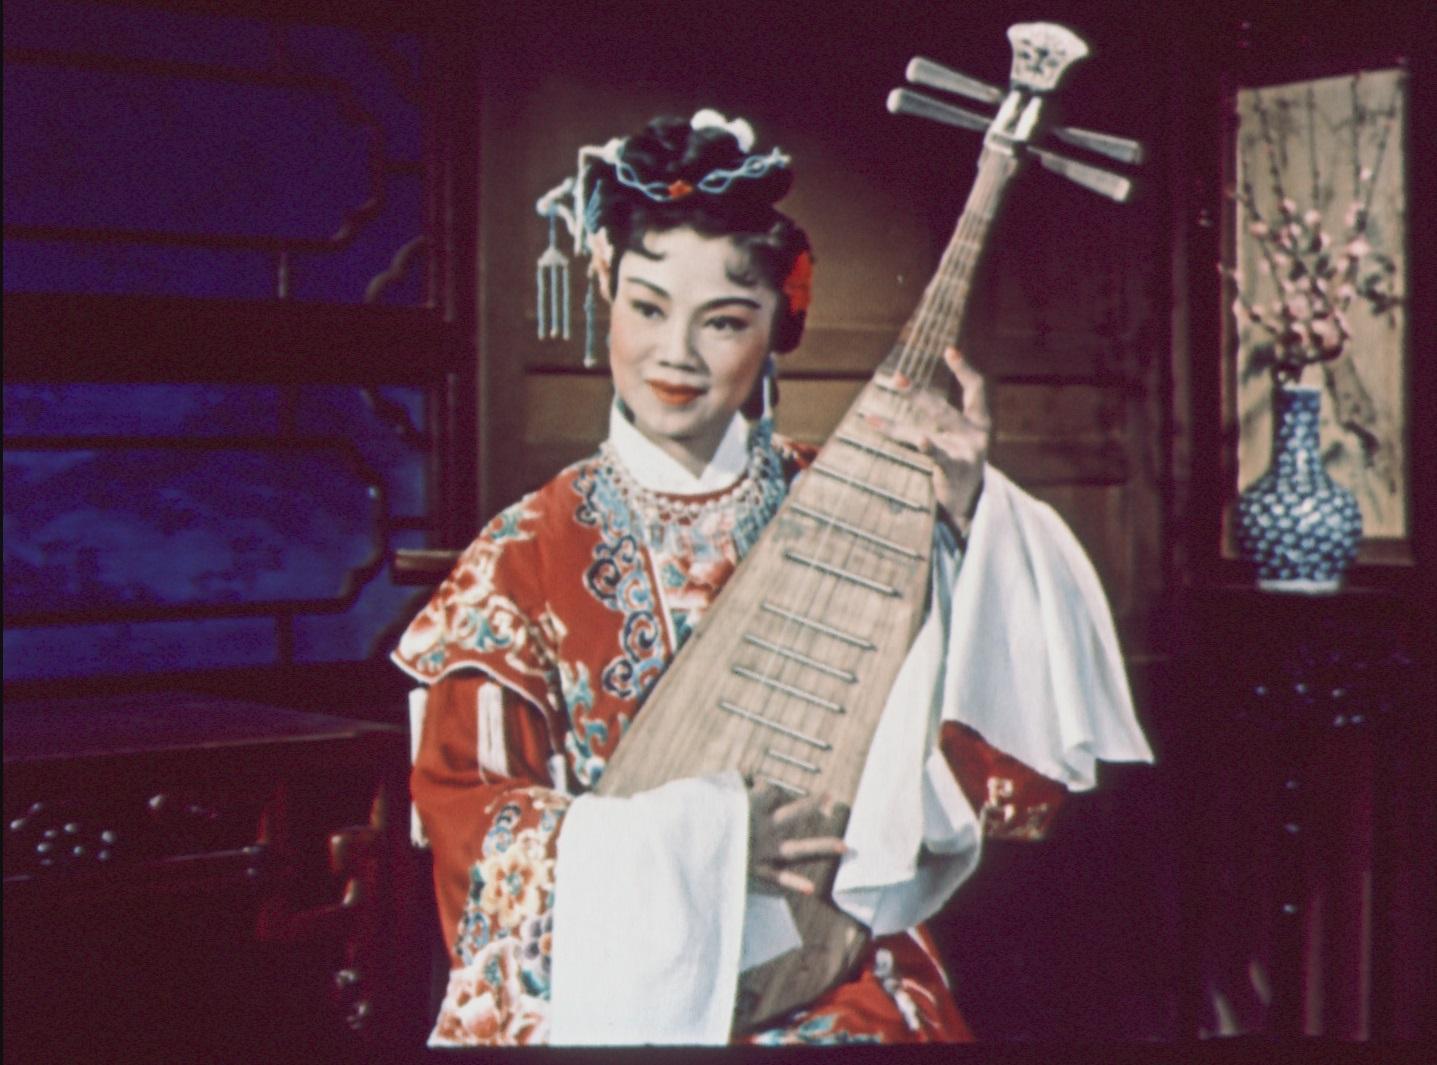 The Chinese Opera Festival 2023 will screen eight selected classic opera films in August and September. Photo shows a film still of "Du Shiniang" (1957).